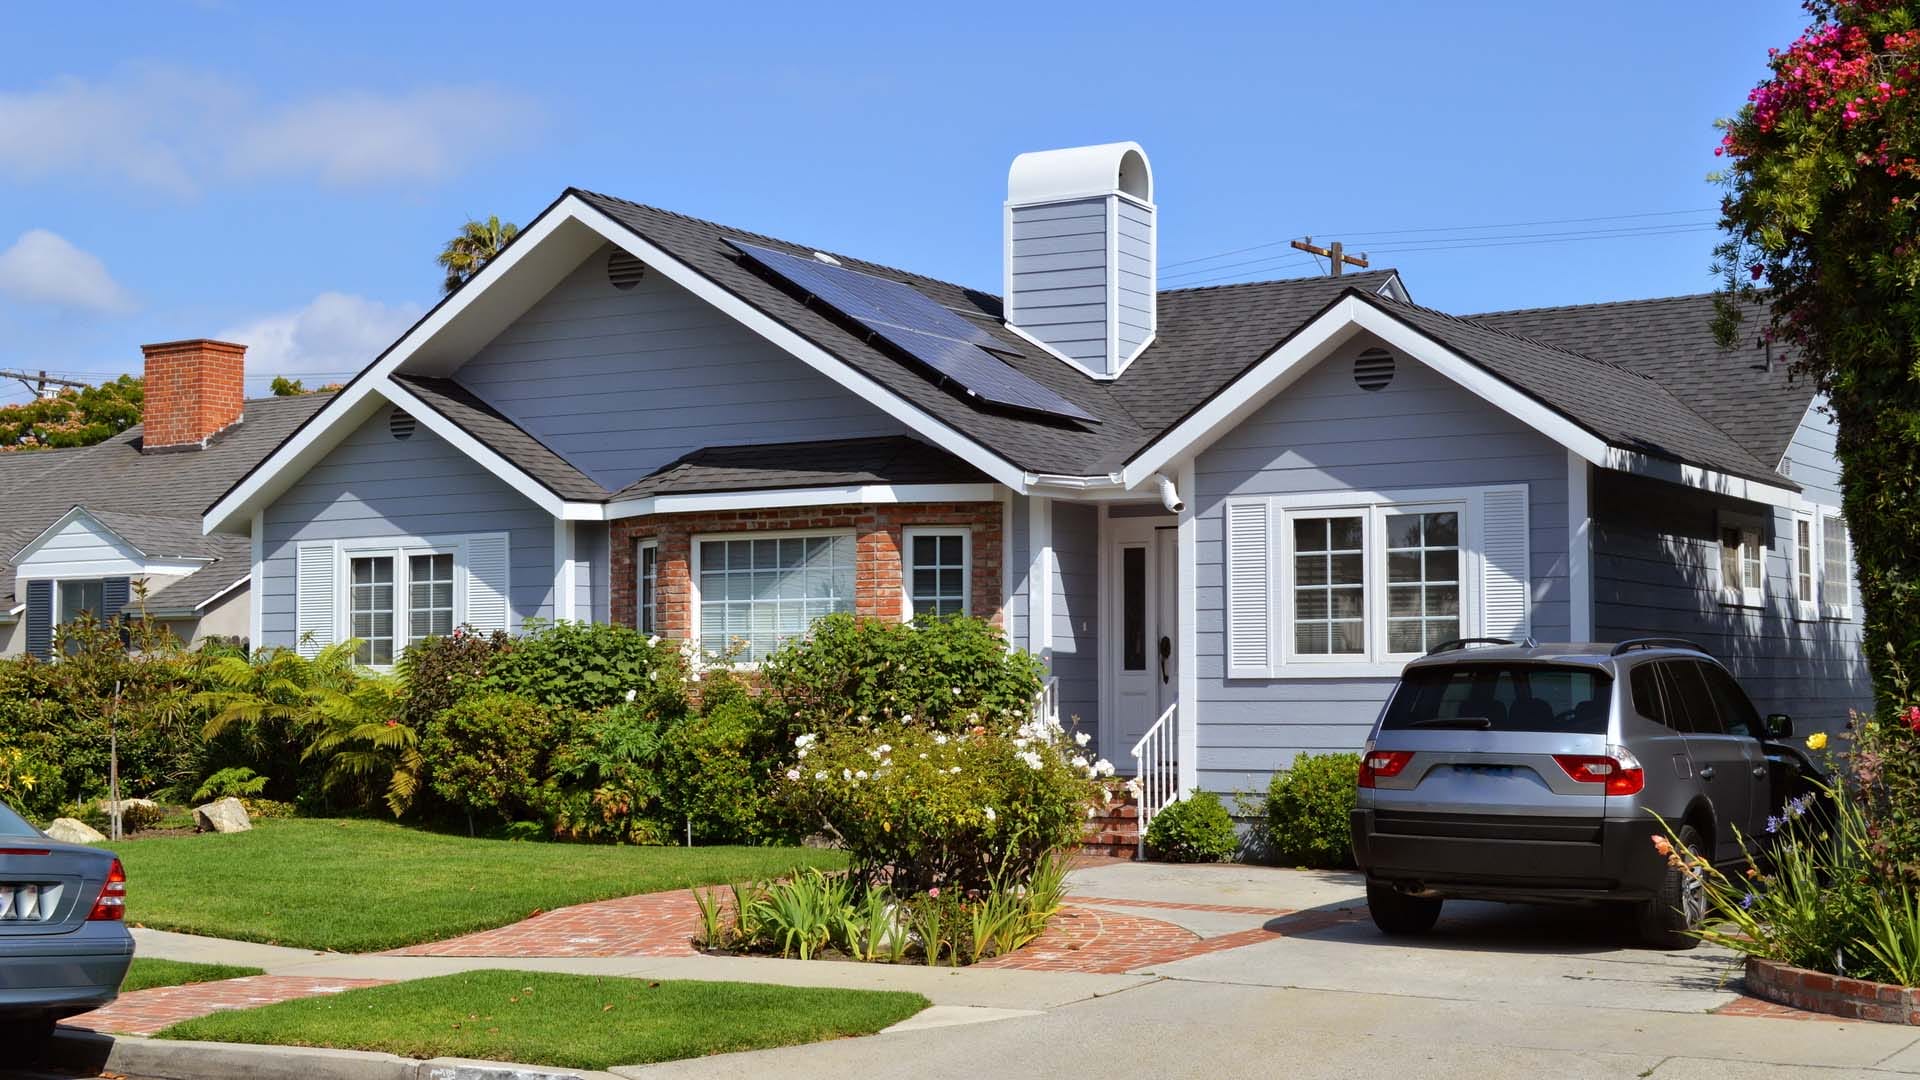 roofing experts in Ventura County, CA